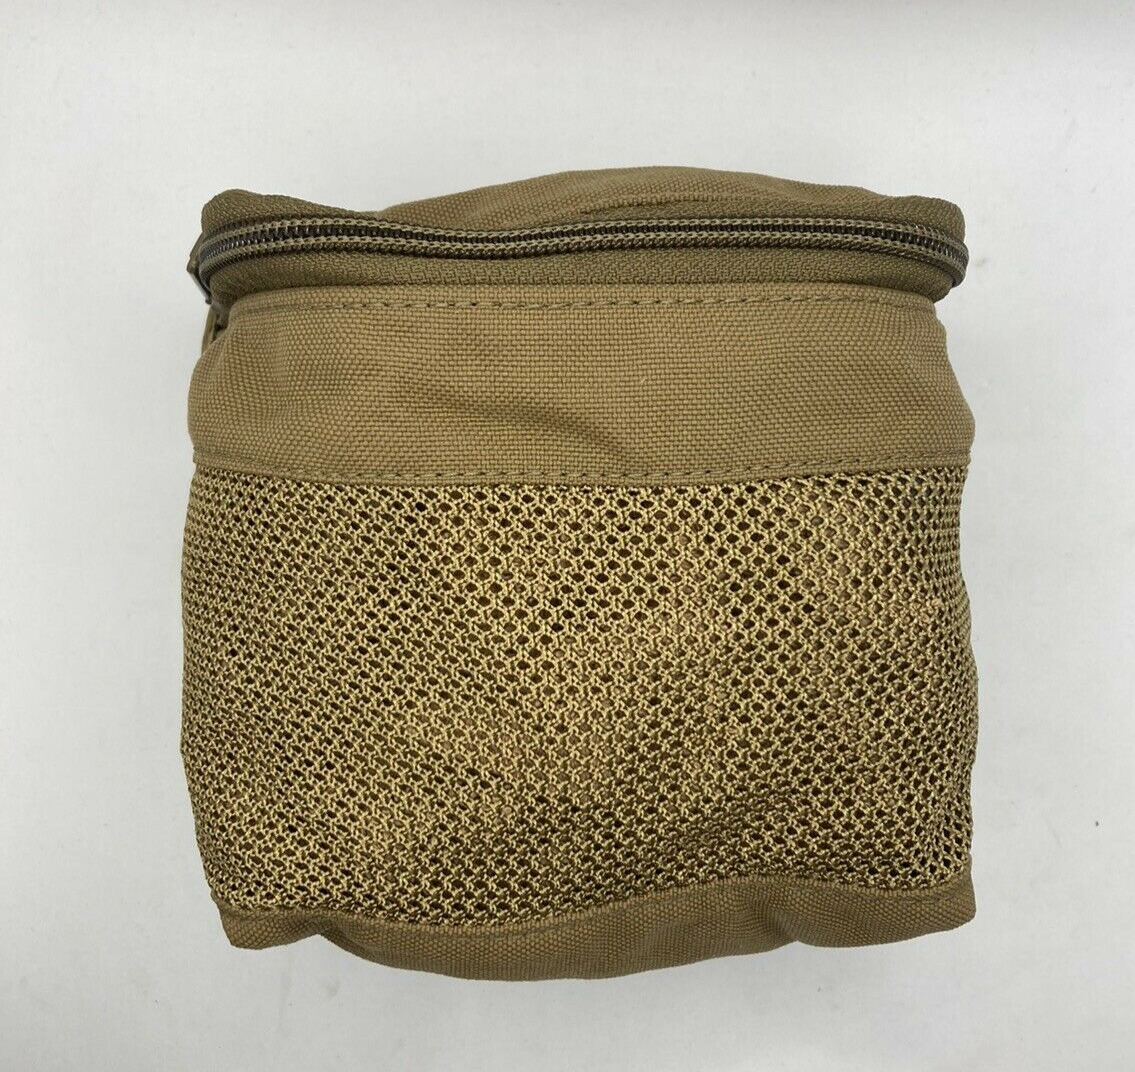 BMI Defense Systems  MOLLE Small Turret Gunner's Mesh Pouch  Coyote USMC NOS